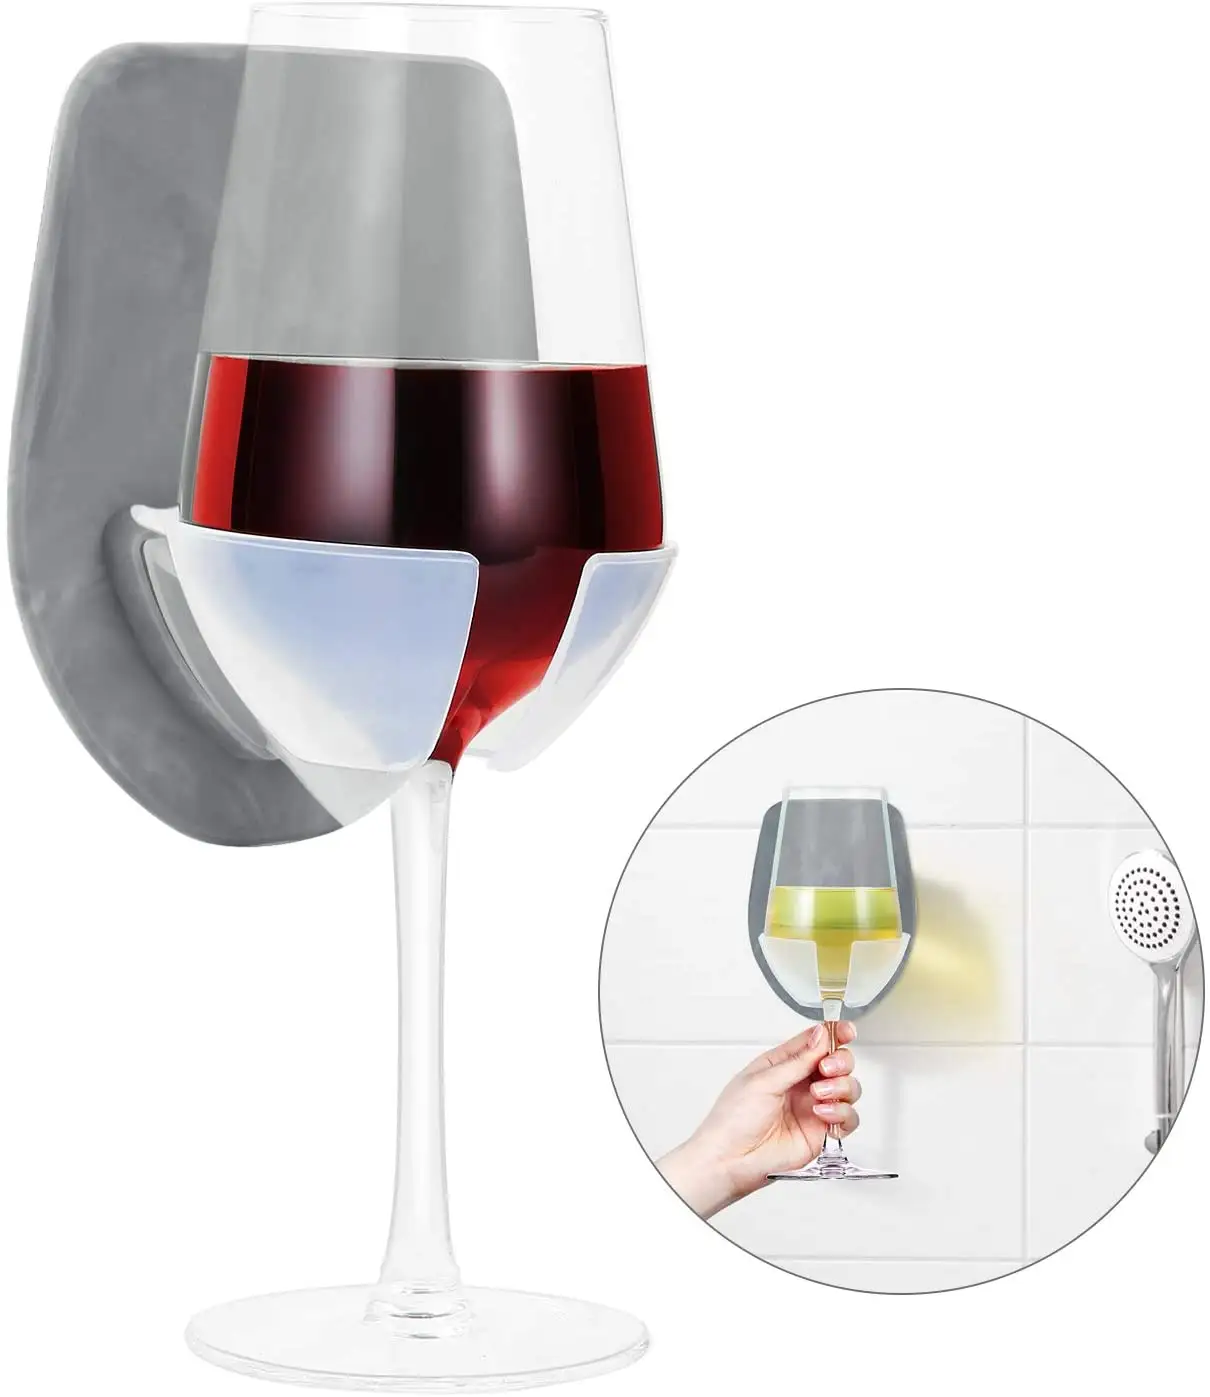 New Silicone Wine Glass Holder for Bath & Shower, Wine Accessories for Wine & Beer, Suction Cup Drink Holder with Strong Suction